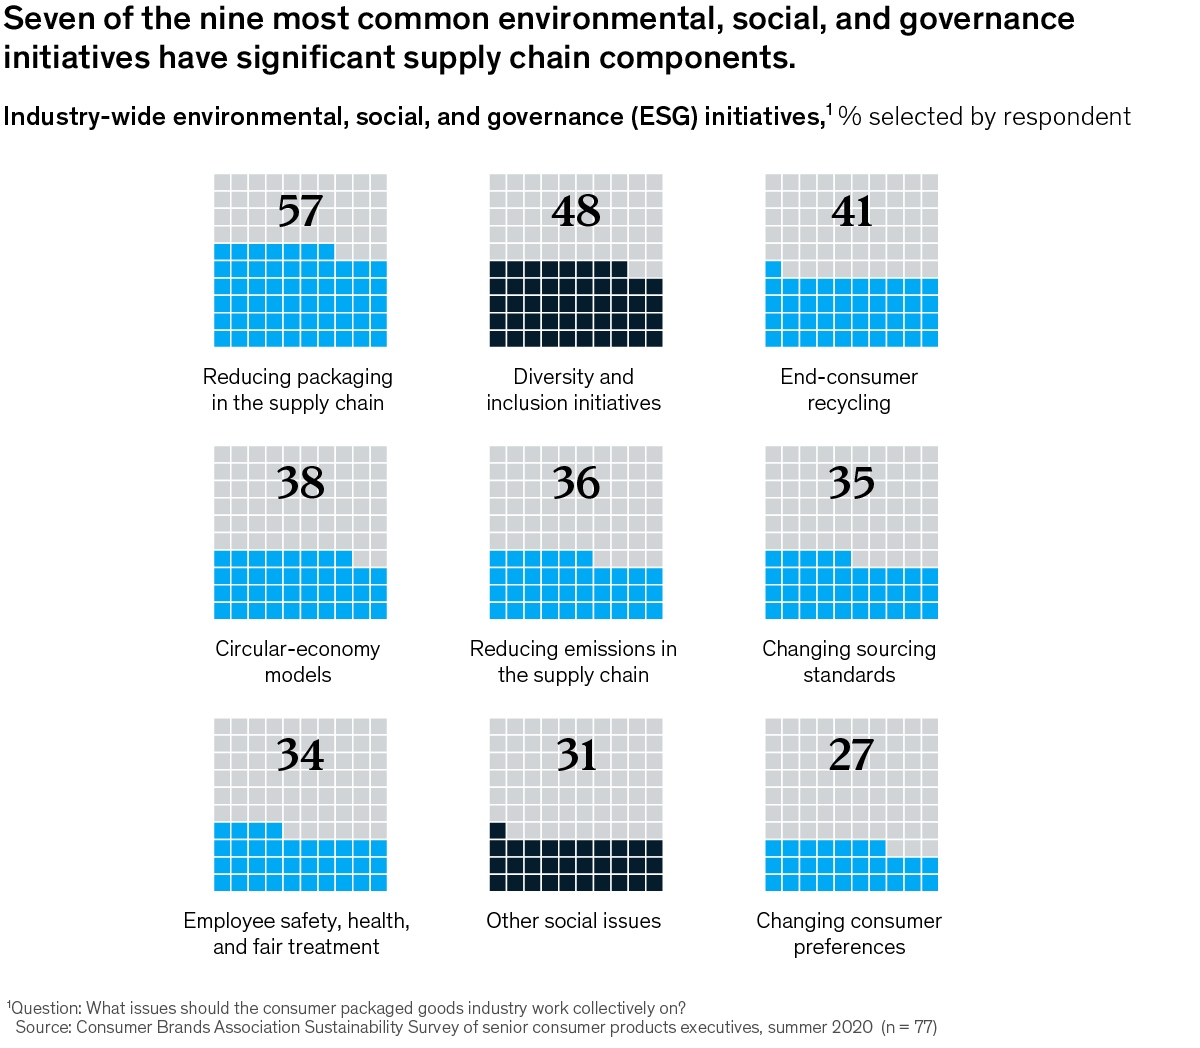 Graphic of supply chain components in industry-wide ESG initiatives